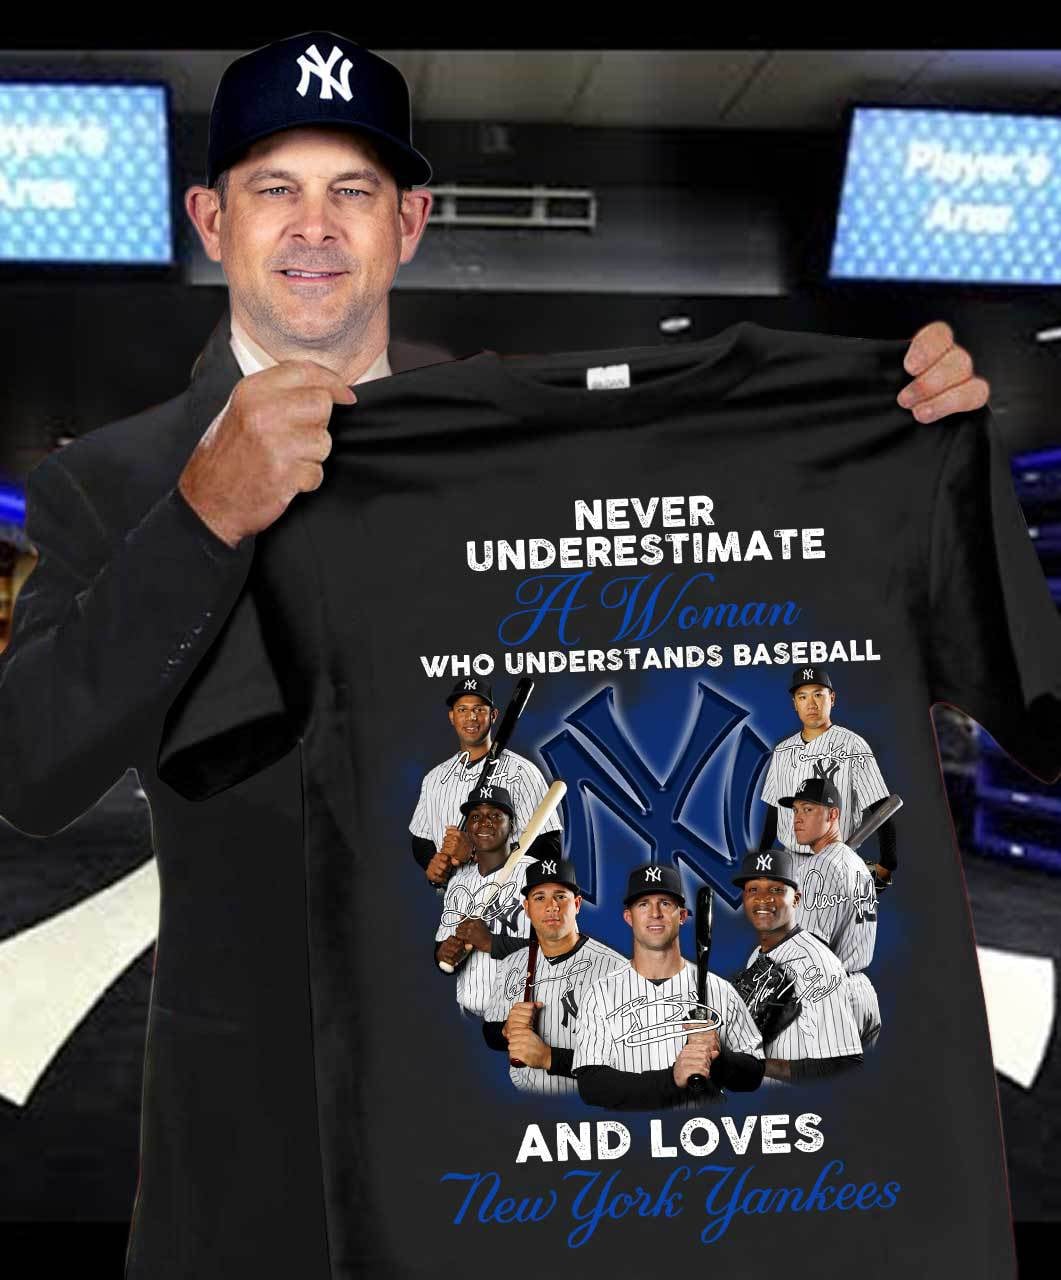 Never%20underestimate%20a%20woman%20who%20understands%20baseball%20and%20loves%20New%20York%20Yankees%20signatures%20shirt hoodieN9k141810T2POST - Official Never underestimate a woman who understands baseball and loves New York Yankees signatures shirt